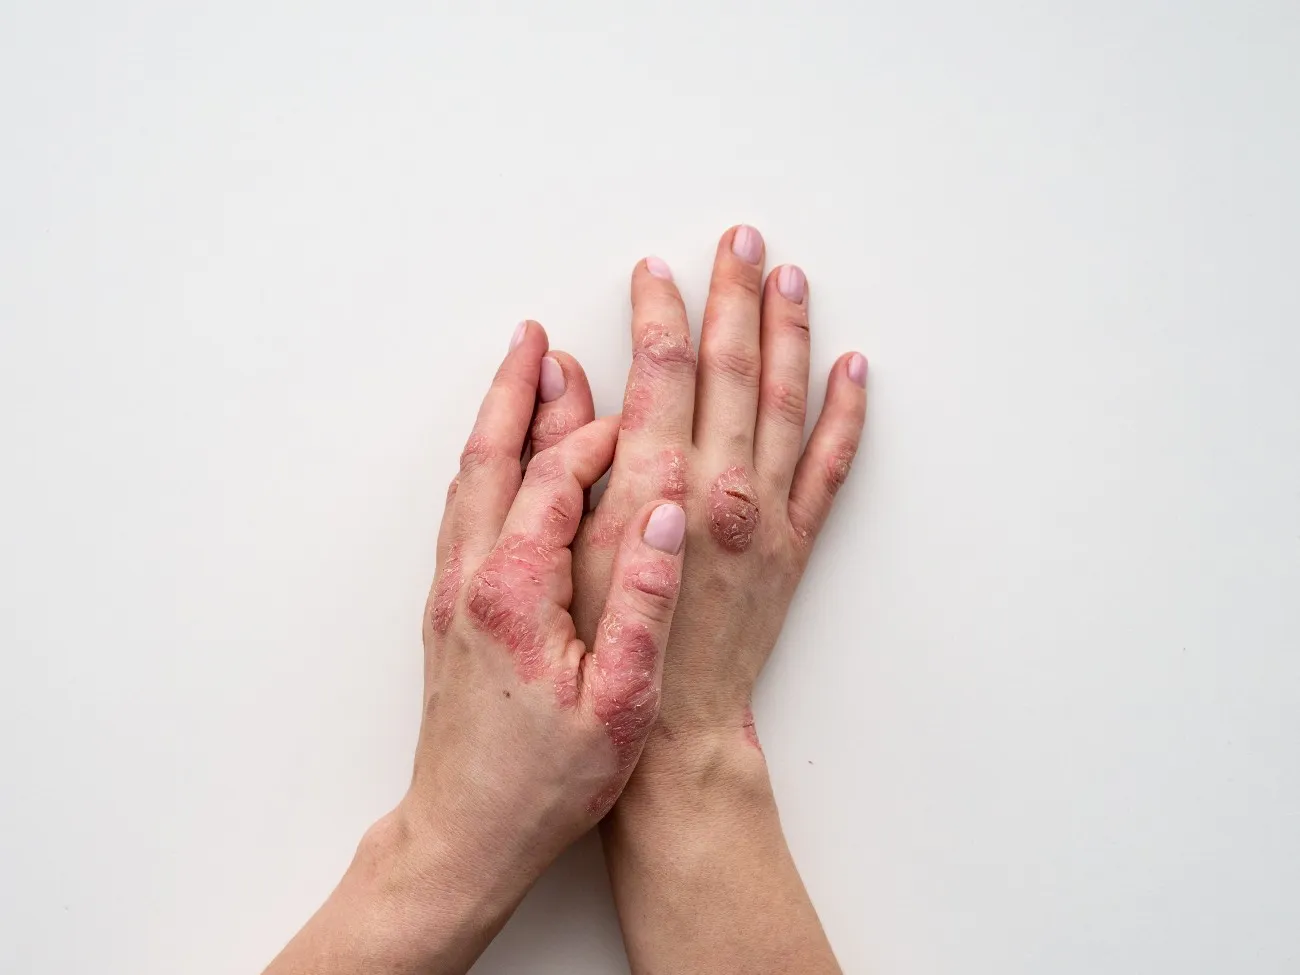 Itchy Patches: How to Know If It’s Psoriasis or Something Else